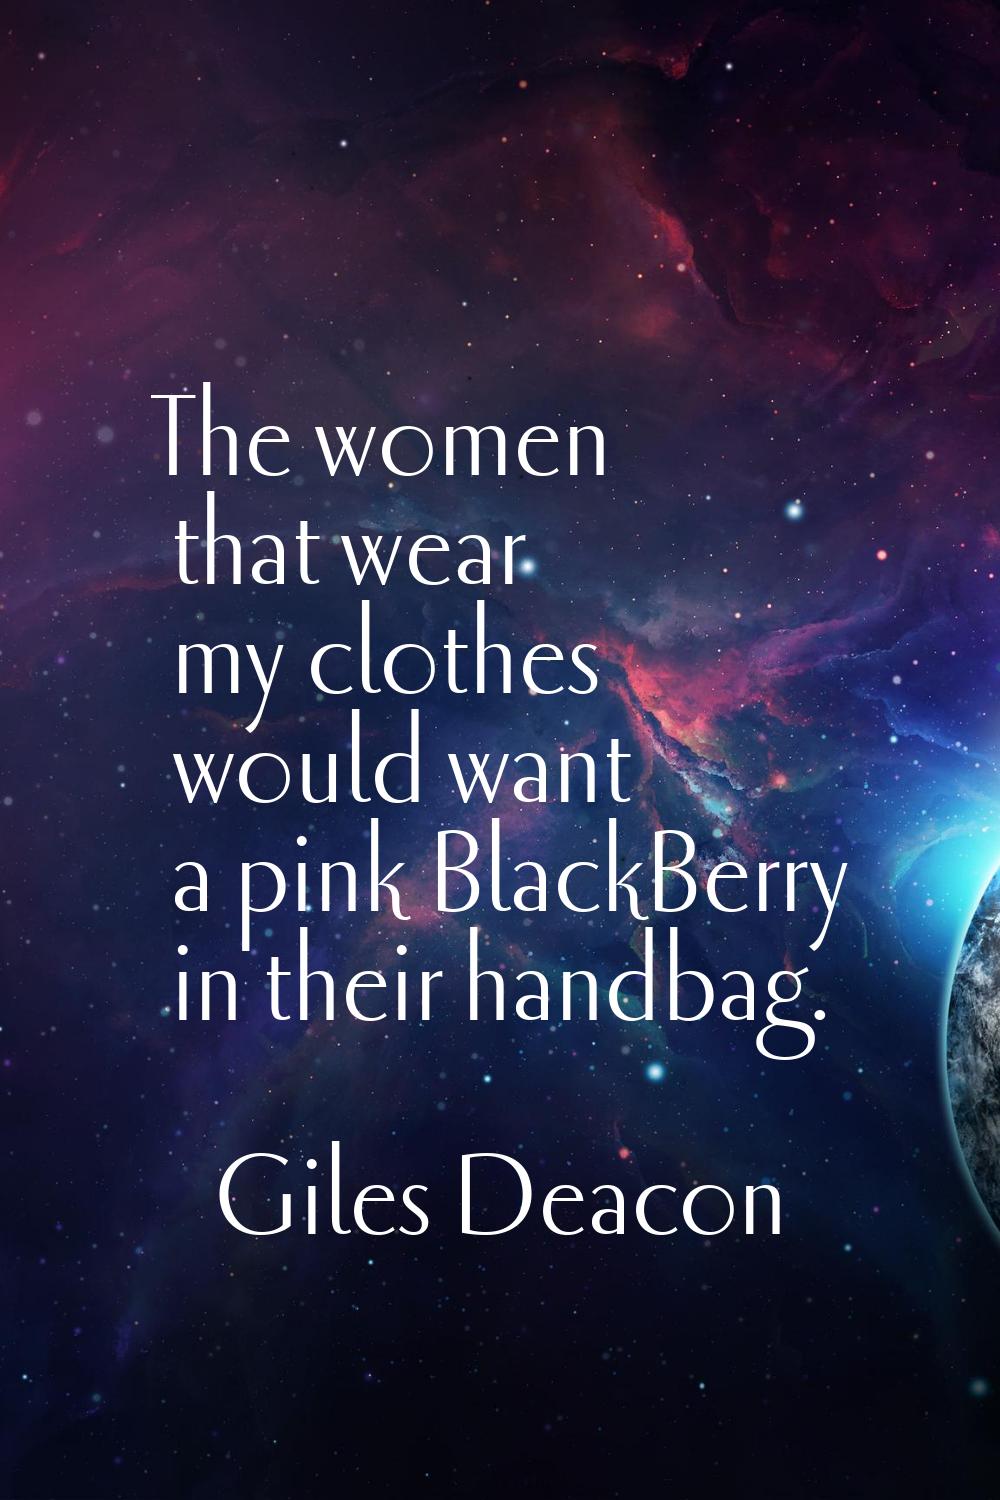 The women that wear my clothes would want a pink BlackBerry in their handbag.